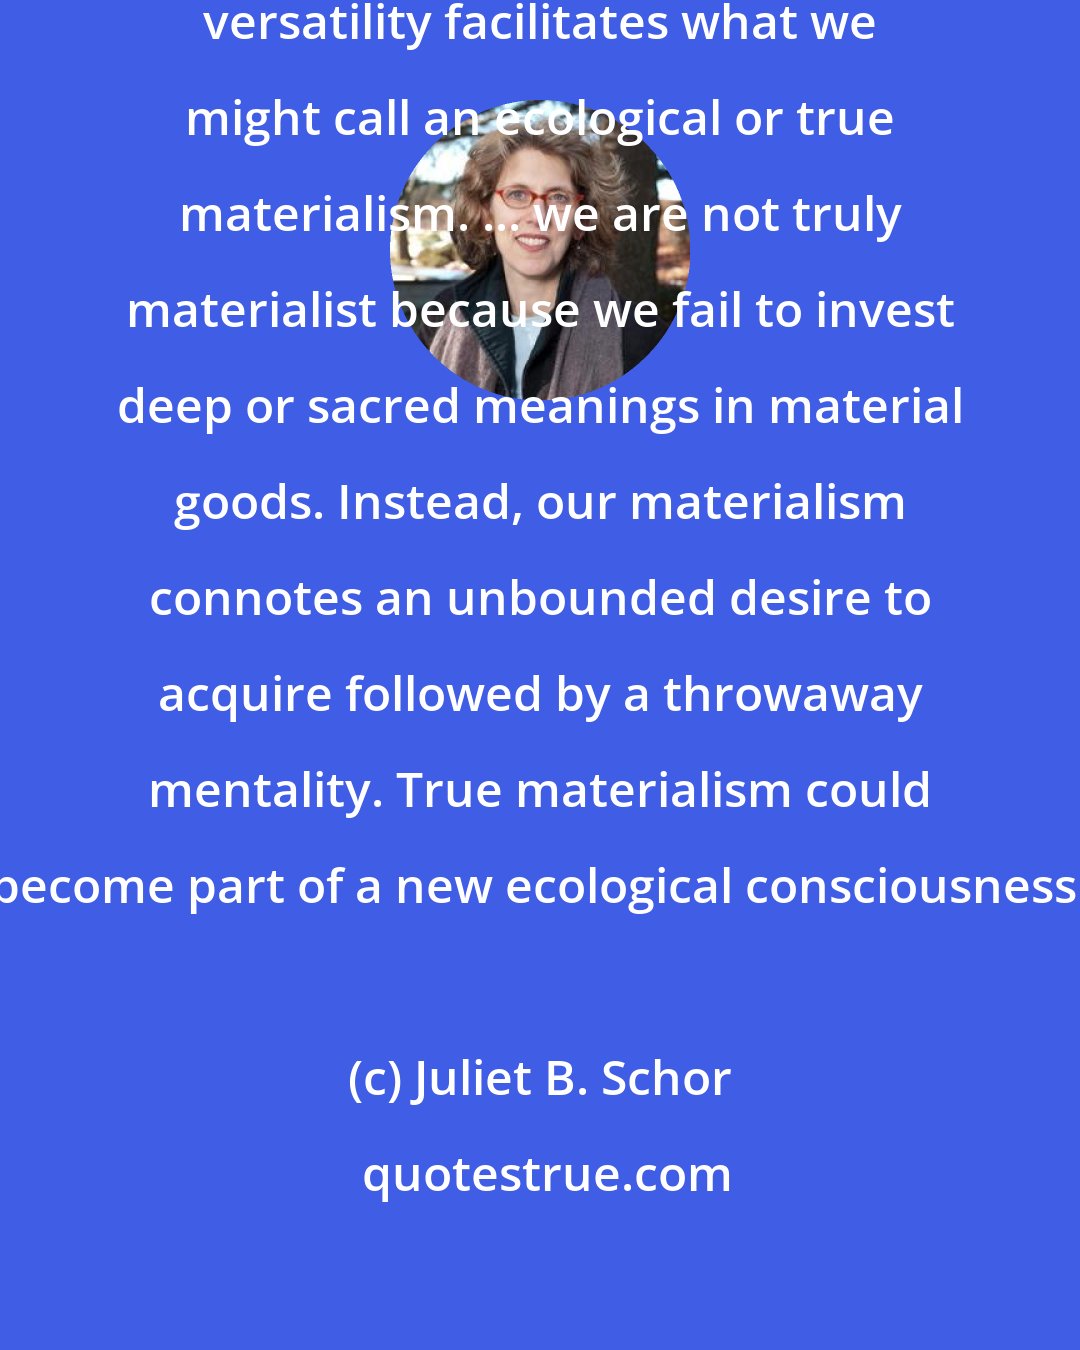 Juliet B. Schor: Striving for longevity through versatility facilitates what we might call an ecological or true materialism. ... we are not truly materialist because we fail to invest deep or sacred meanings in material goods. Instead, our materialism connotes an unbounded desire to acquire followed by a throwaway mentality. True materialism could become part of a new ecological consciousness.